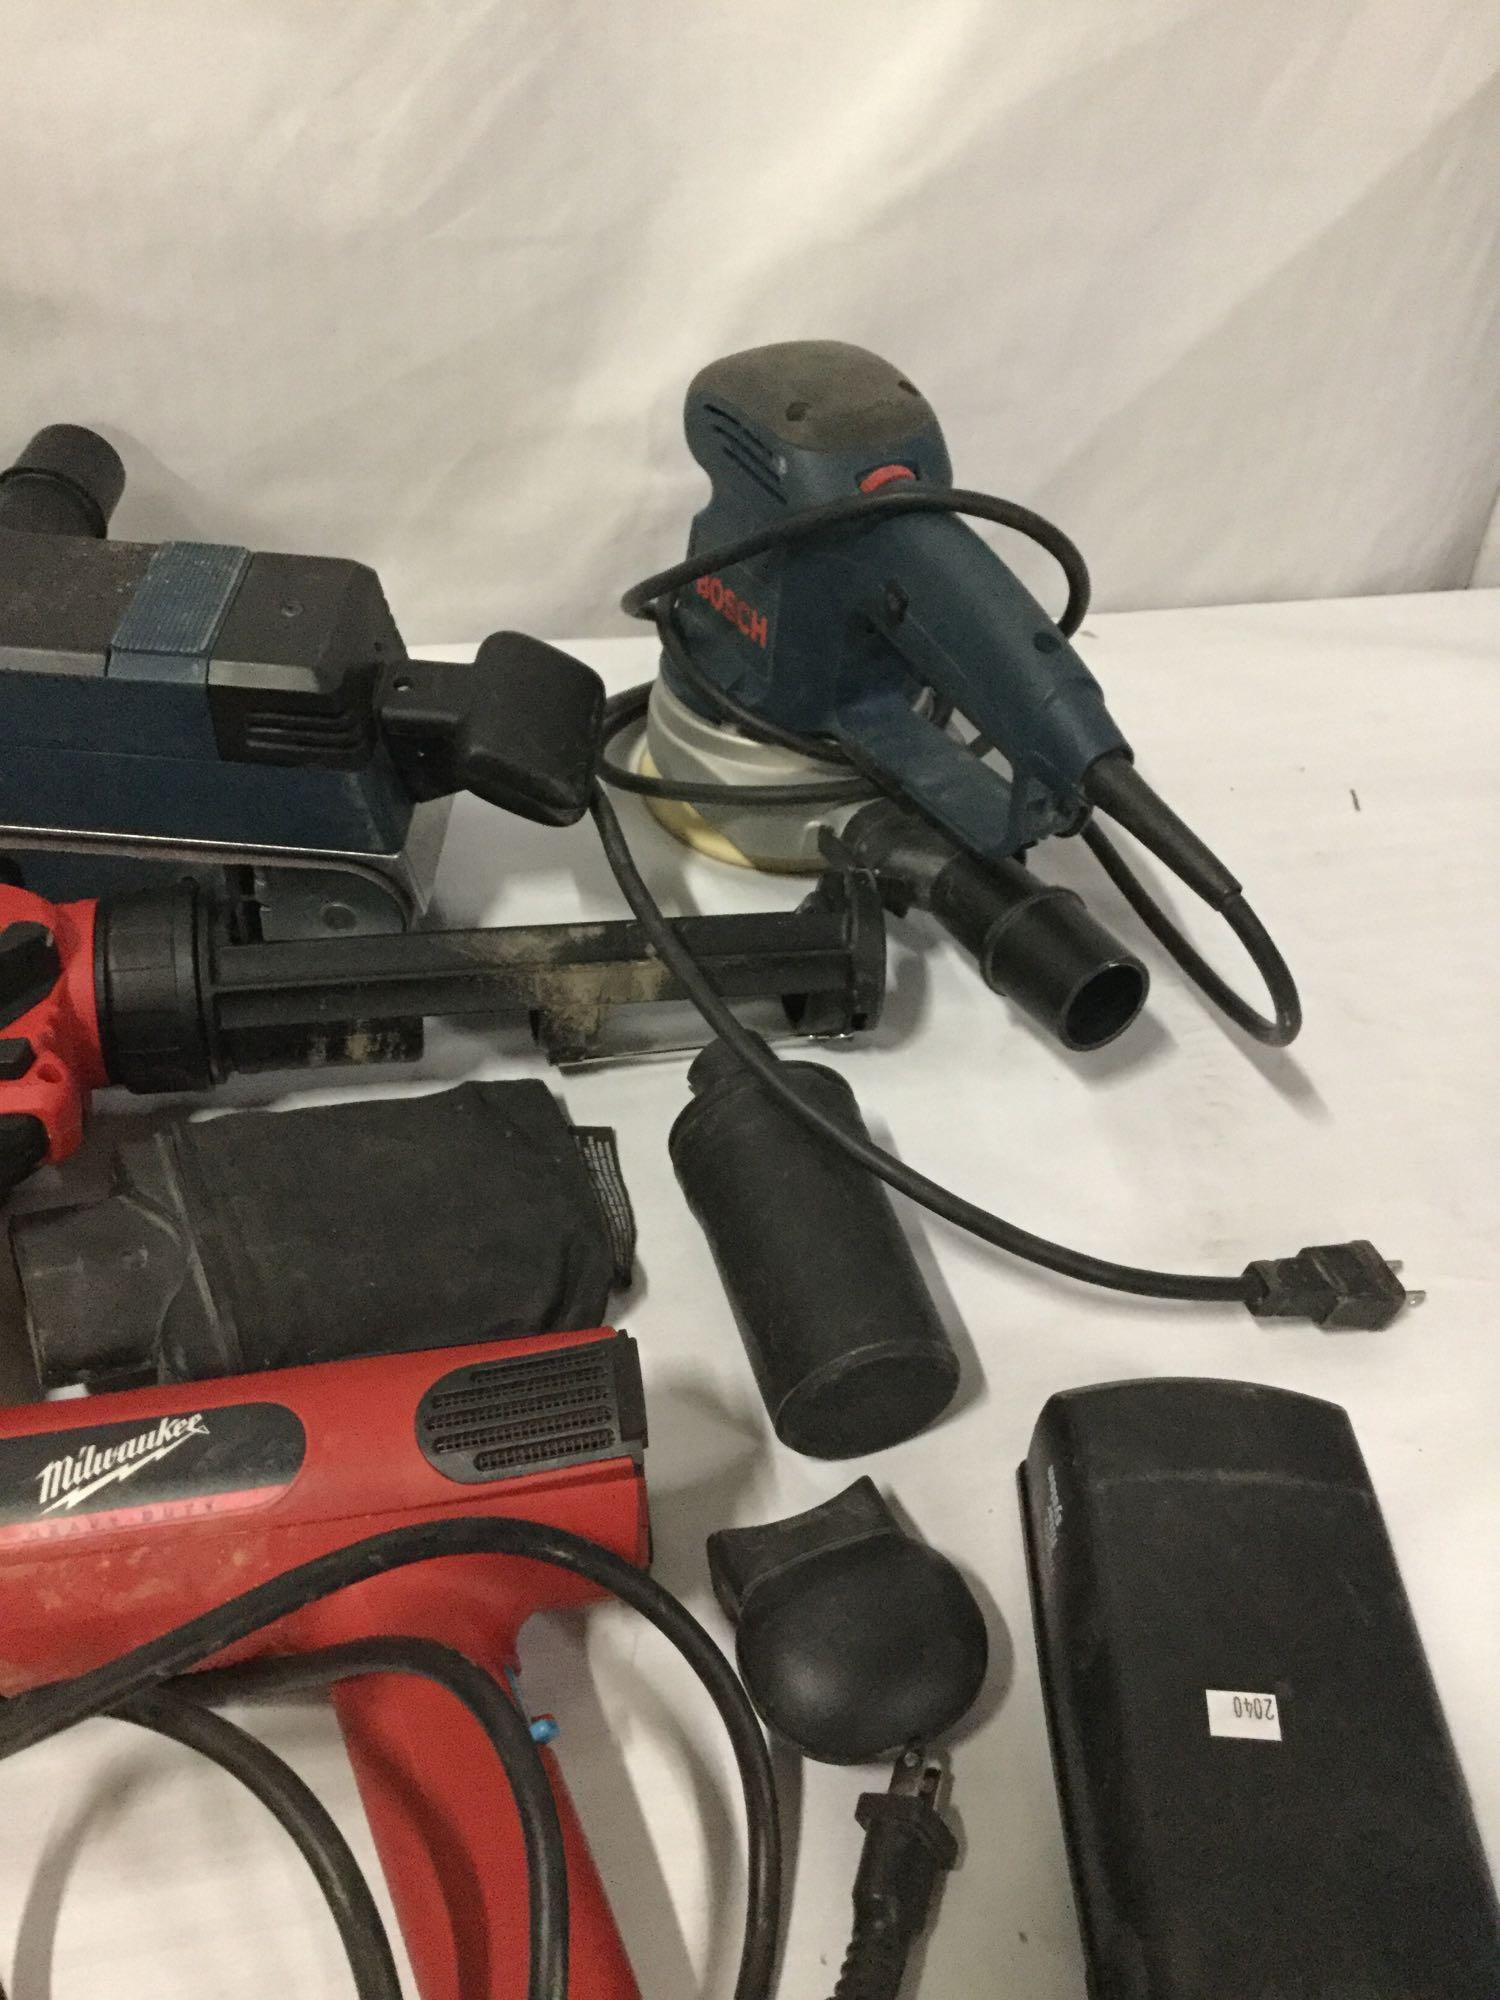 Collection of pneumatic, cordless, corded electric power tools. Bosch, Milwaukee, DeWalt, Bostitch